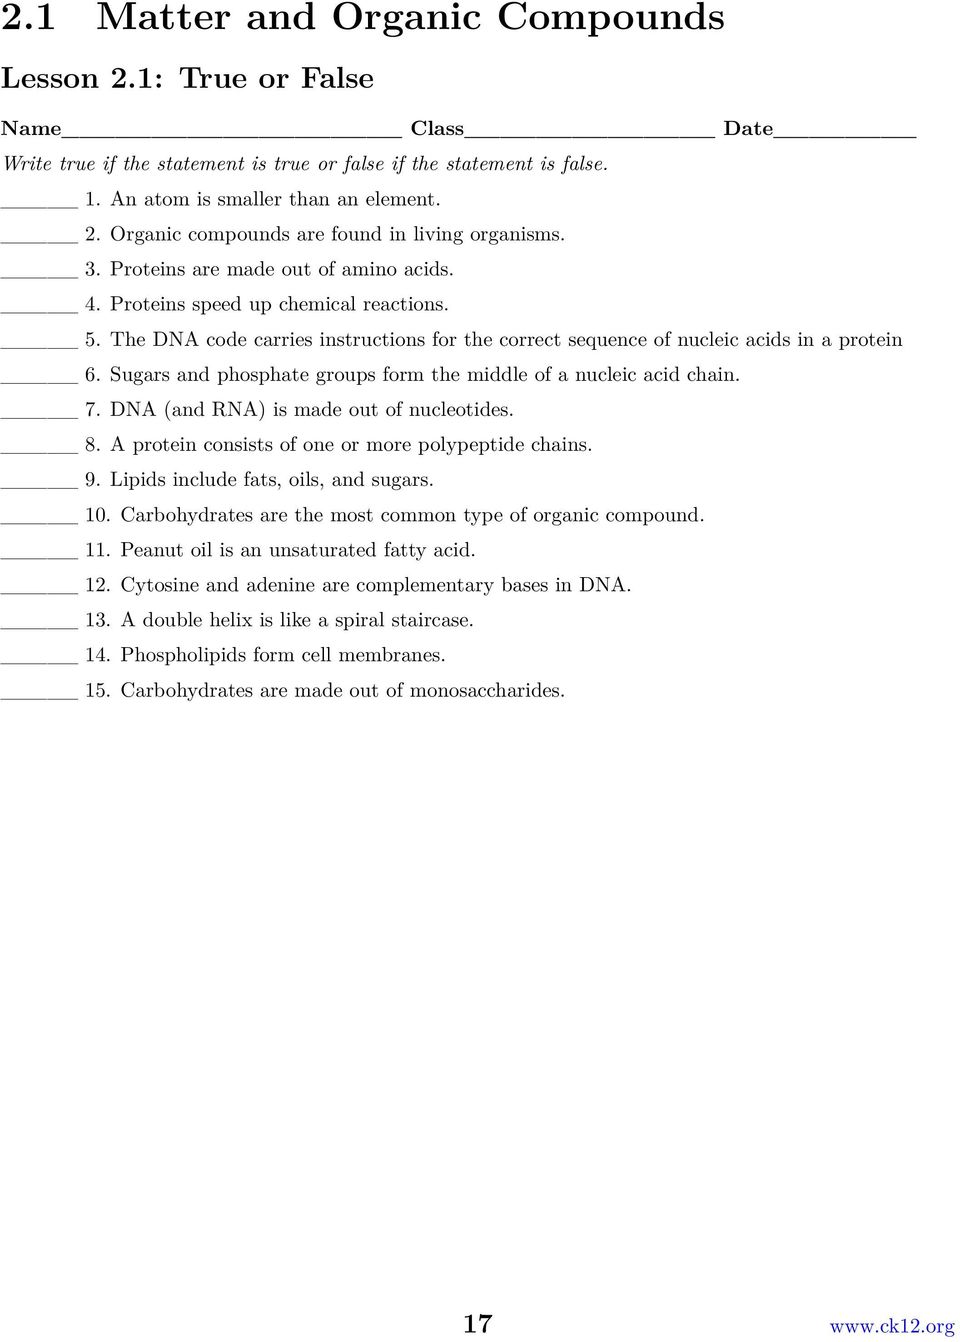 Chapter 11. The Chemistry of Life Worksheets - PDF Free Download Regarding The Chemistry Of Life Worksheet